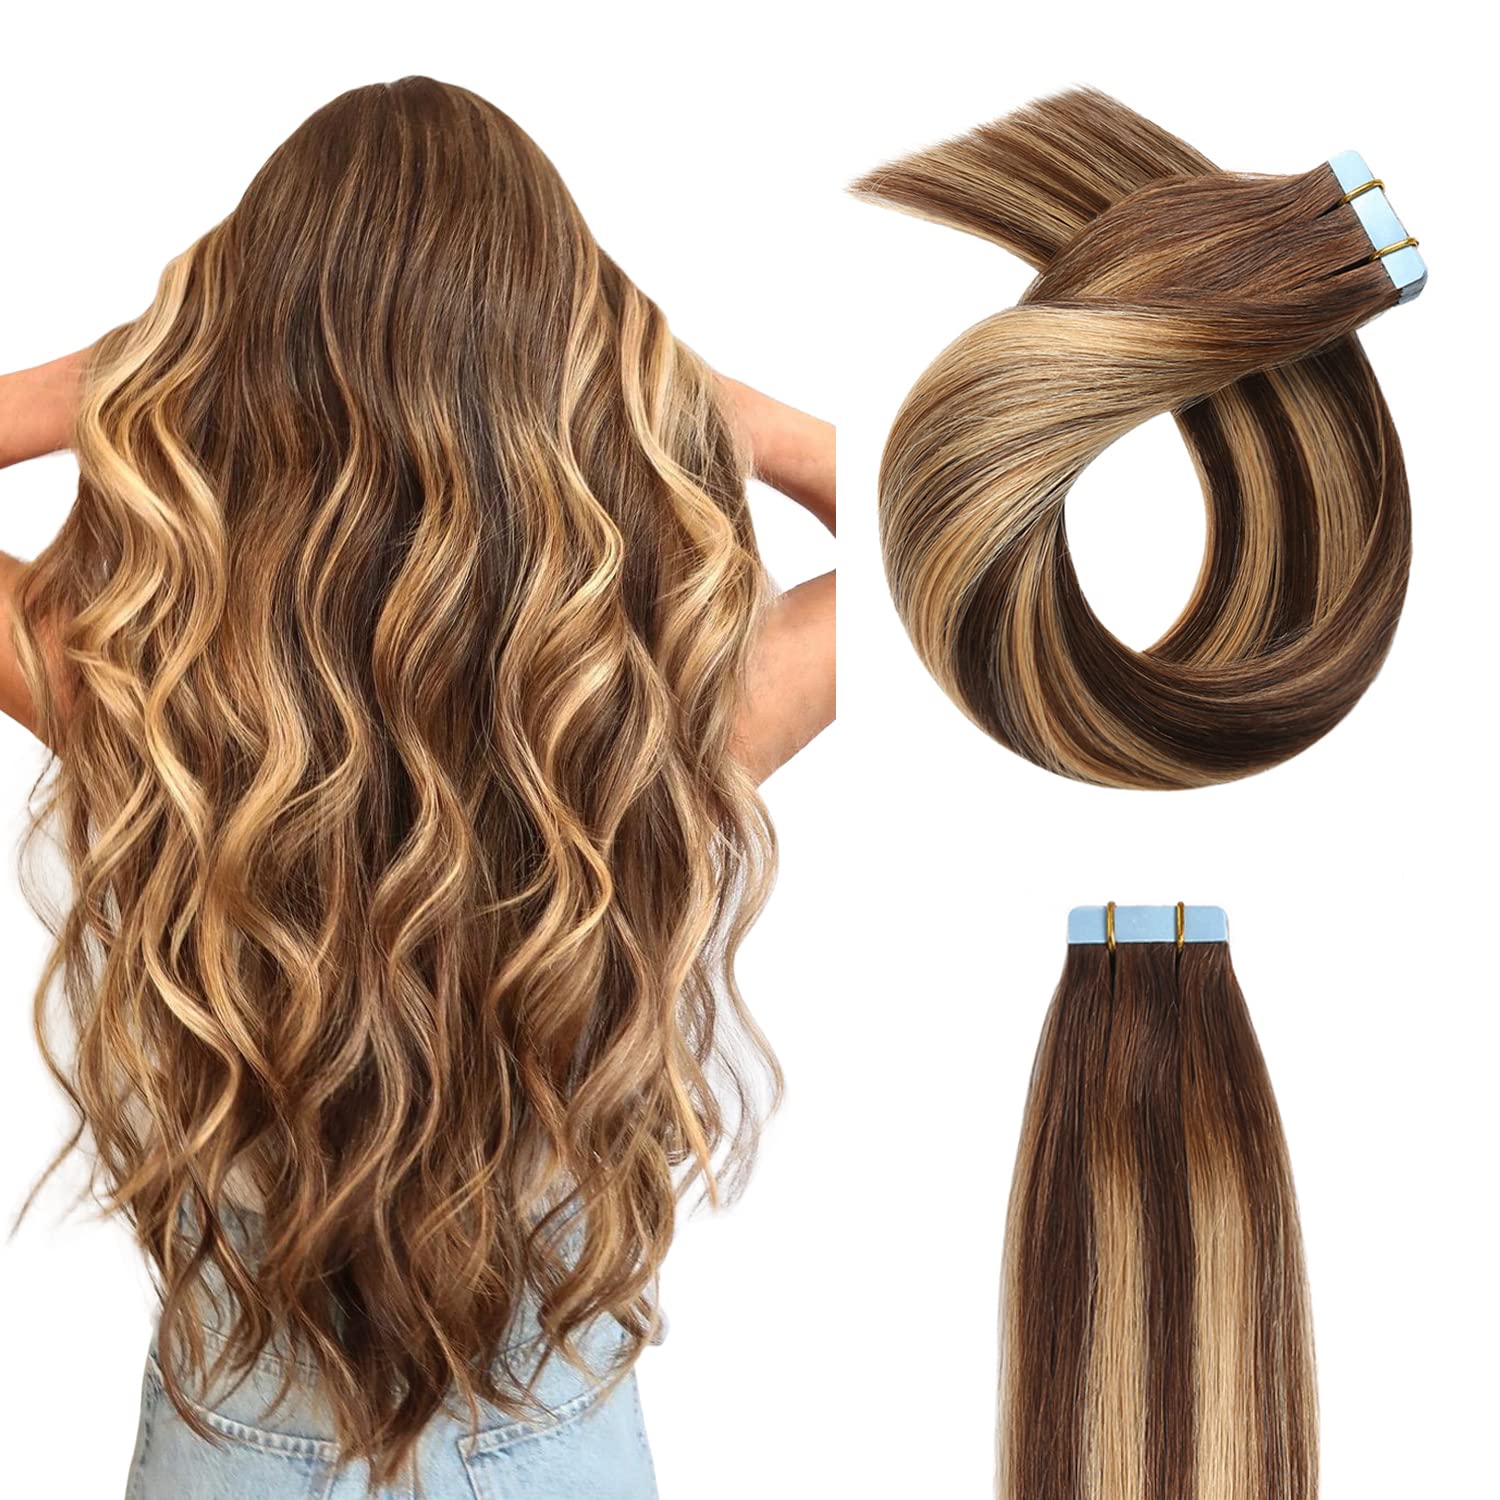 YILITE Tape in Hair Extensions Human Hair 12inch-24inch P4/27 with #4 Root 20PCS 50Gram Tape ins Balayage Dark Brown to Caramel Blonde Tape in Hair